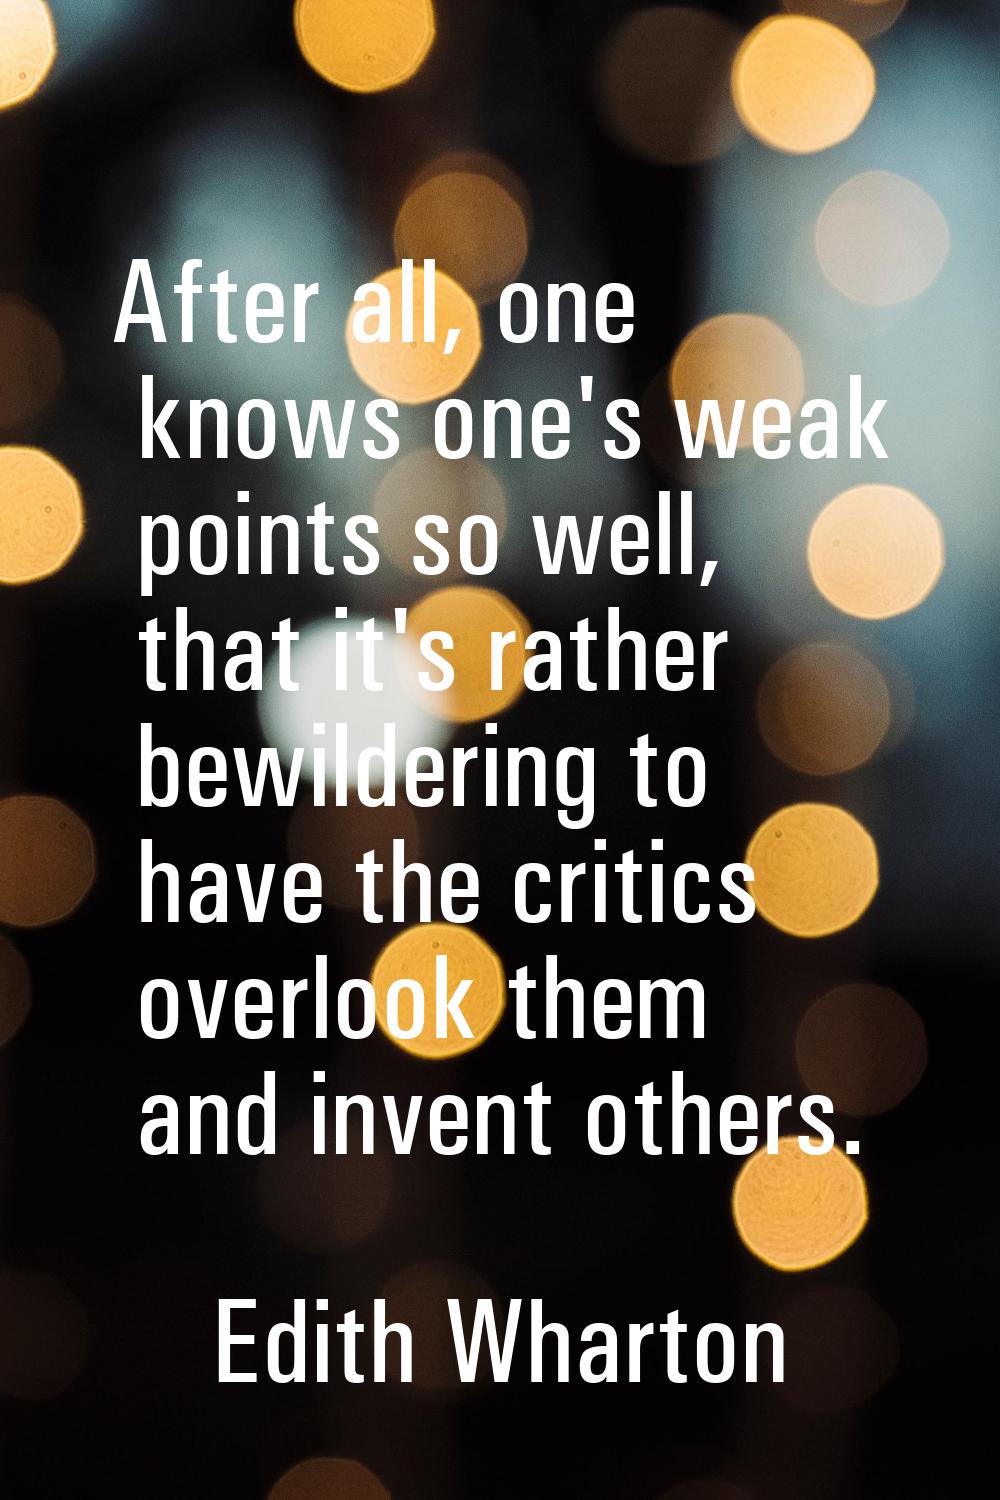 After all, one knows one's weak points so well, that it's rather bewildering to have the critics ov